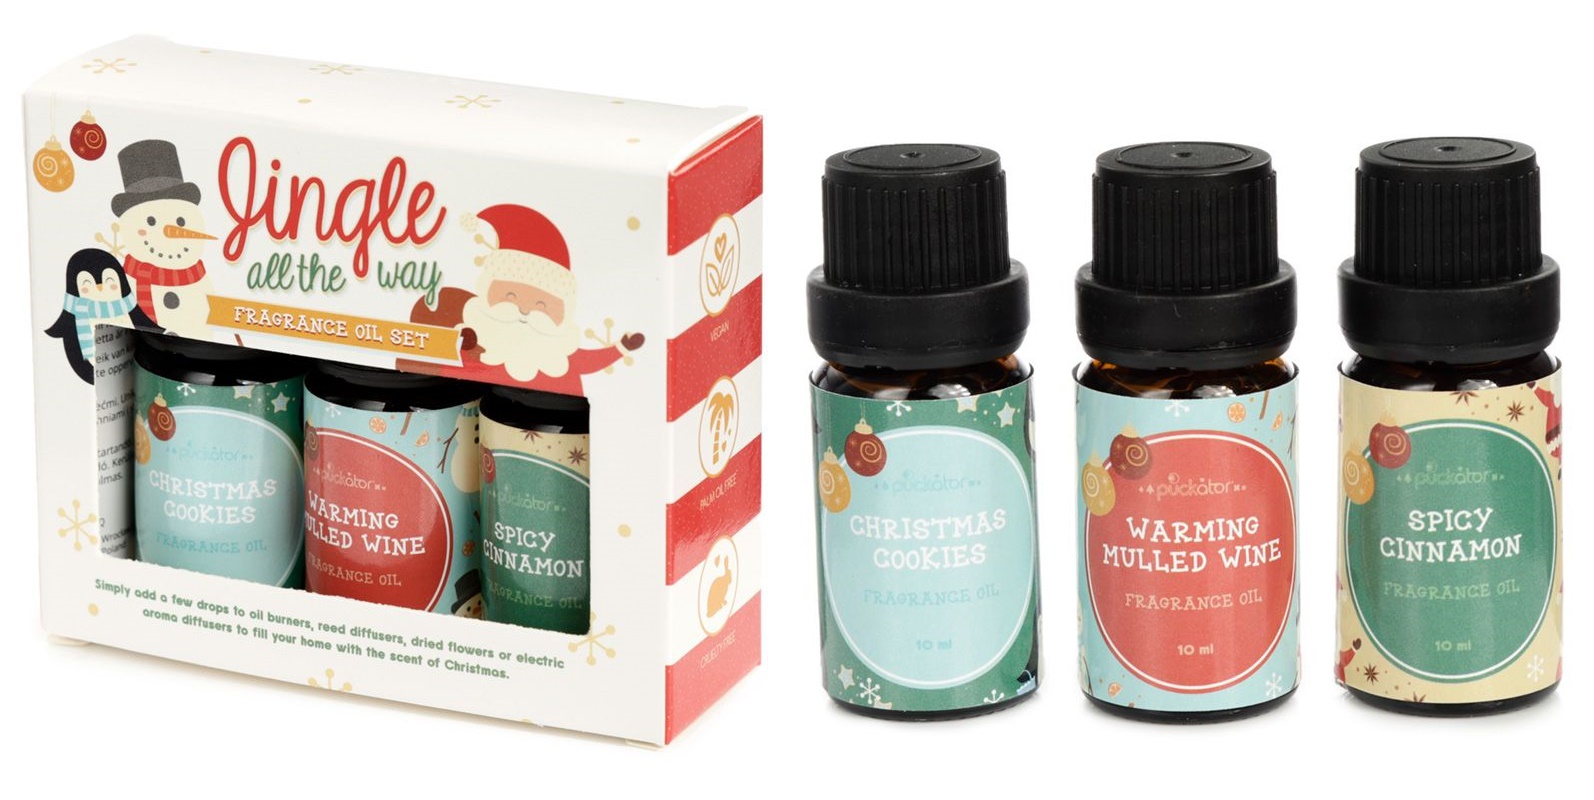 Jingle All the Way Eden Set of 3 Christmas Fragrance Oils - Cinnamon, Mulled Wine, Christmas Cookie